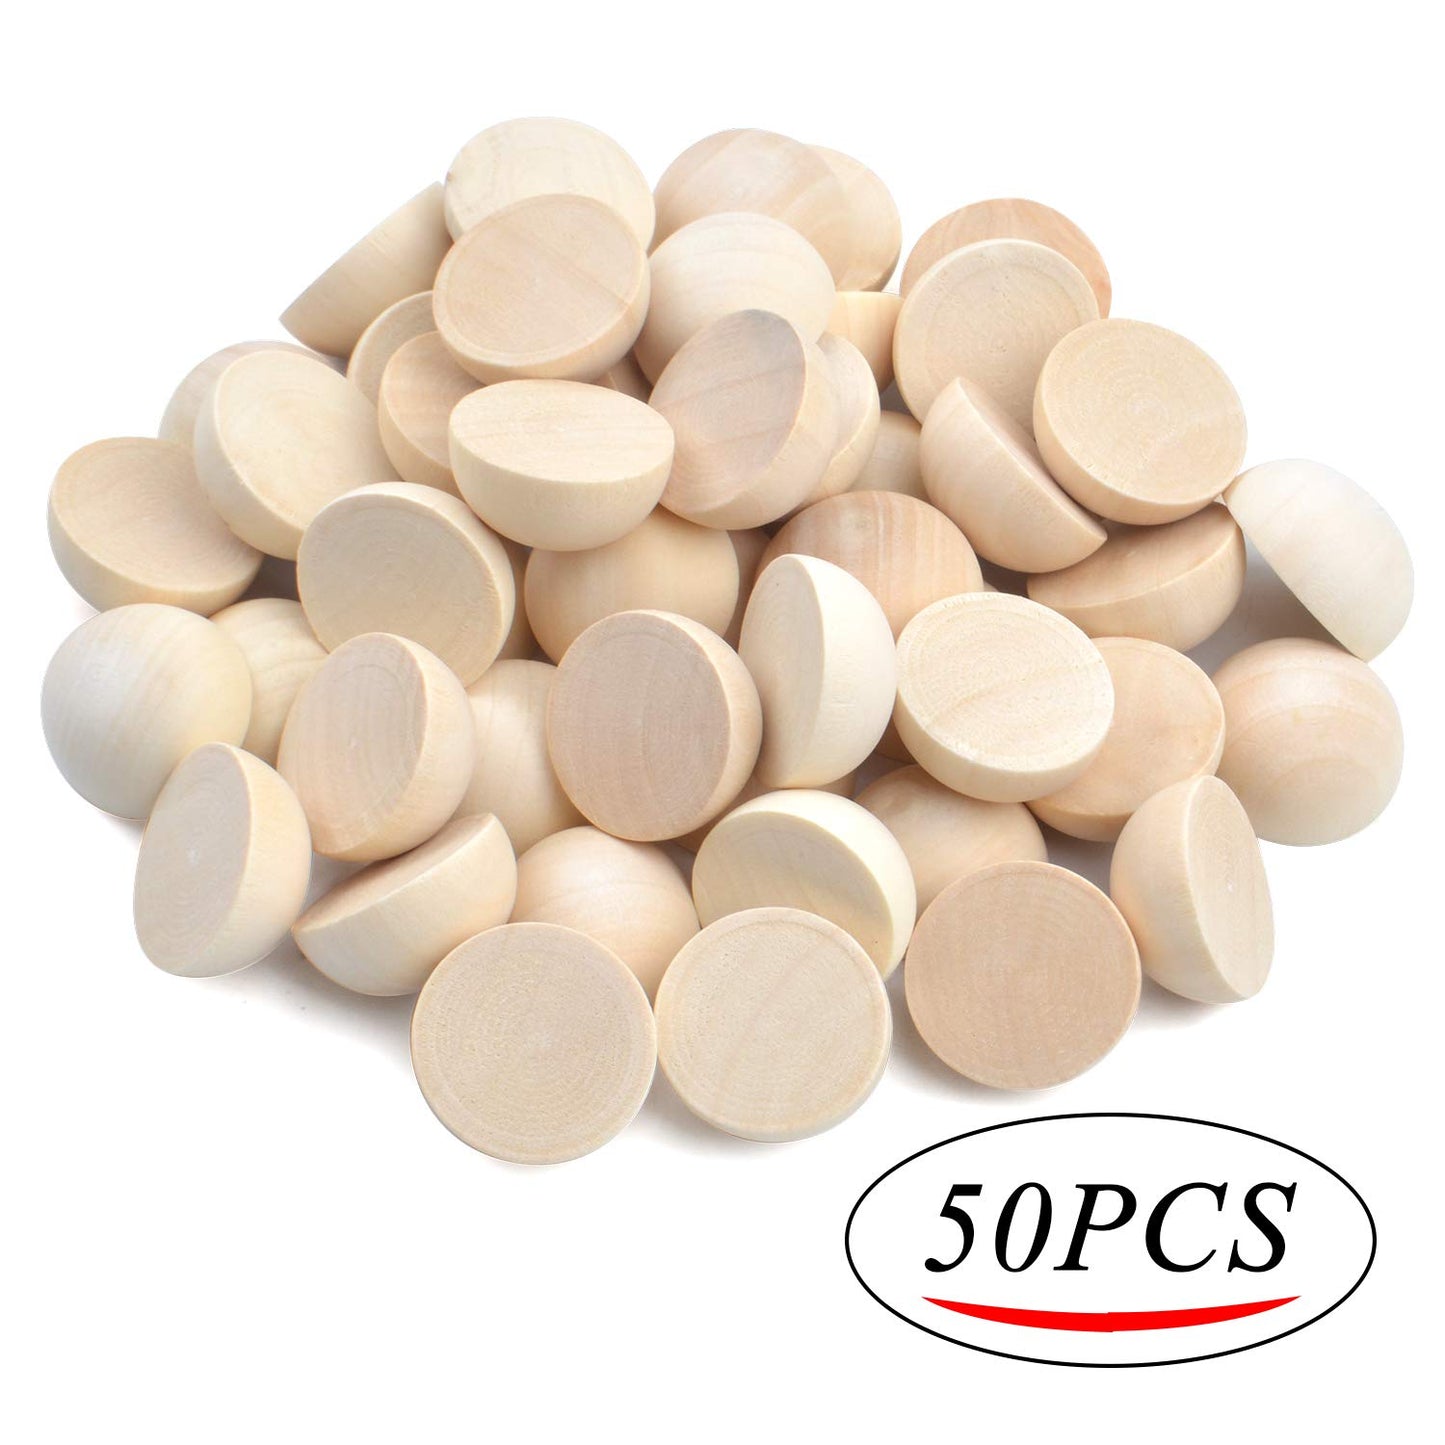 50 Pieces 25mm Natural Half Wooden Balls Decration Split Beads for DIY Projects Crafts Kids Toy